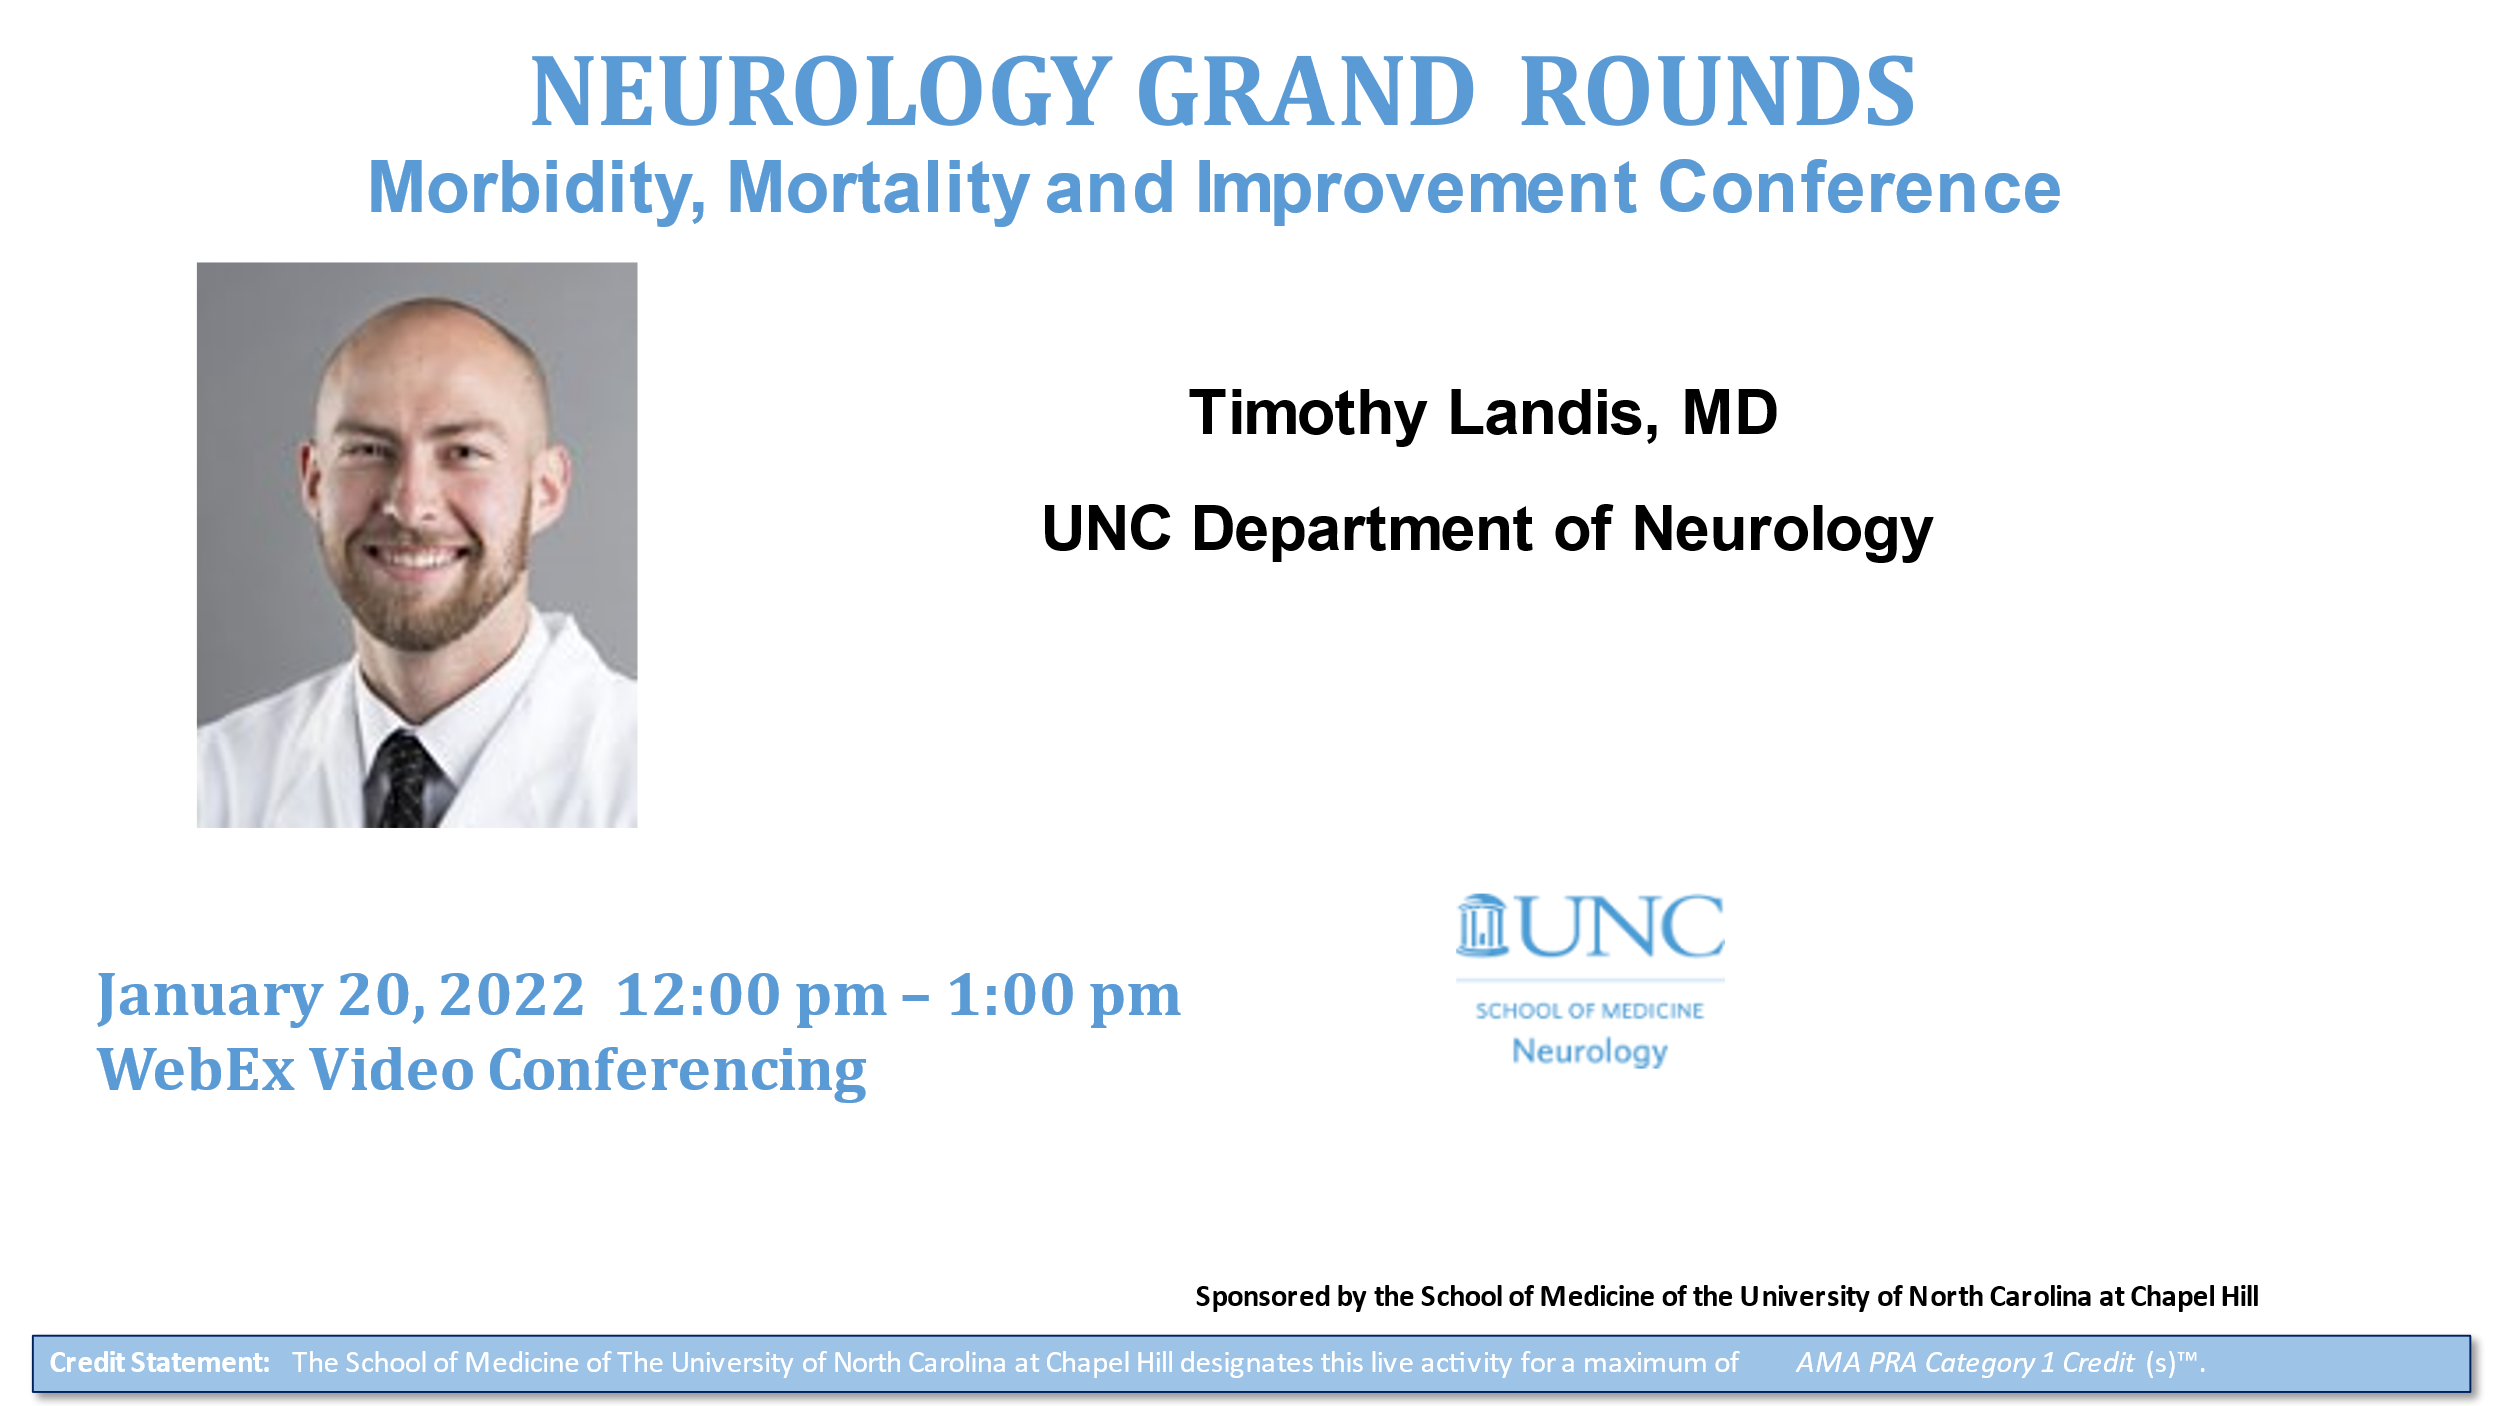 Grand Rounds - Timothy Landis, MD